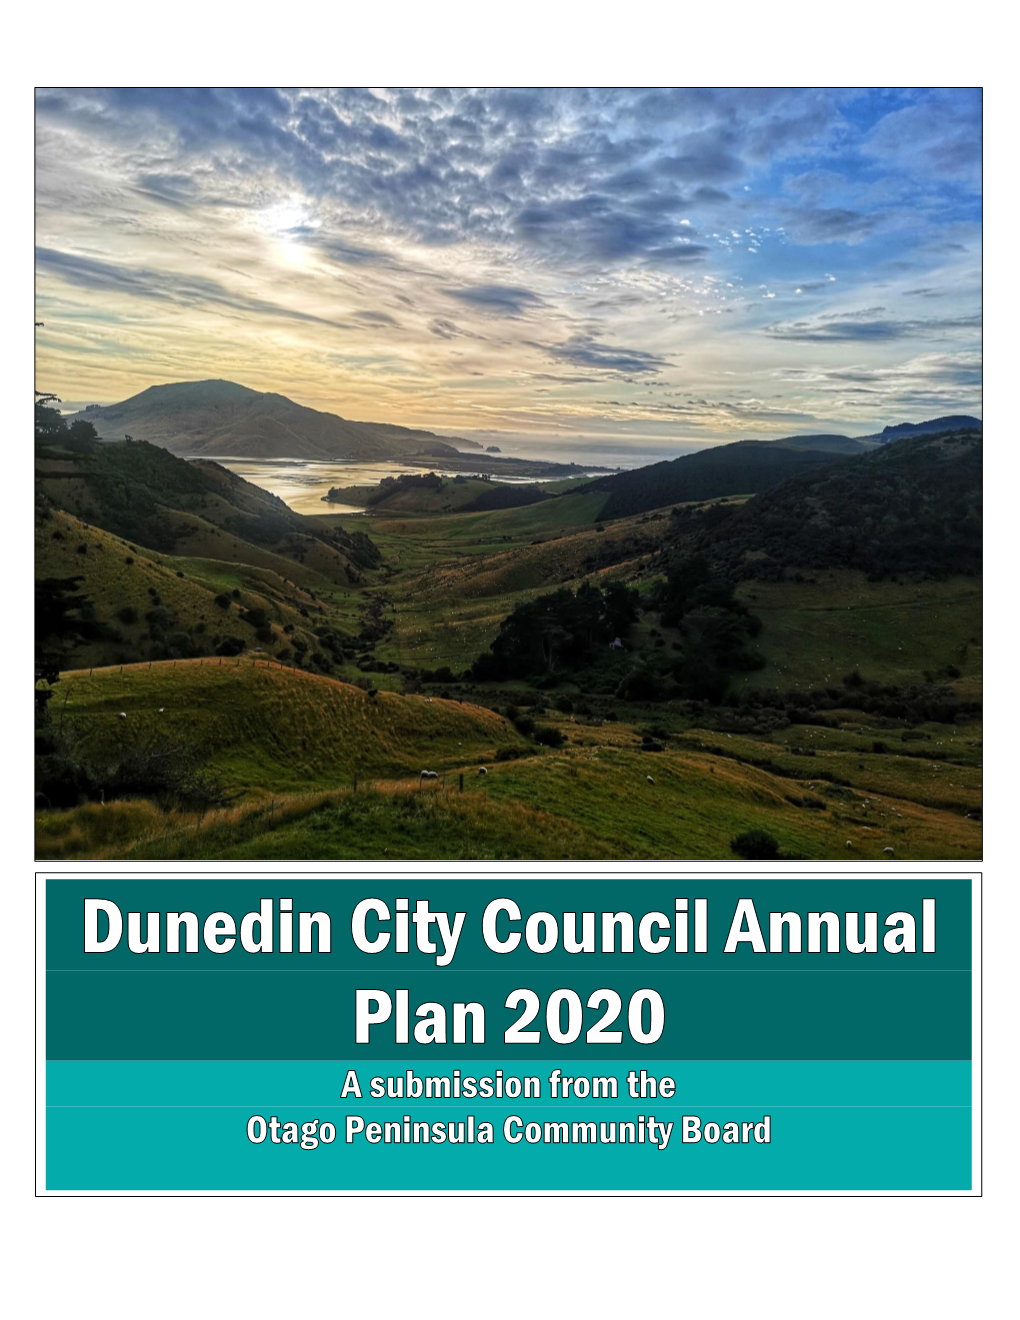 A Submission to the Dunedin City Council